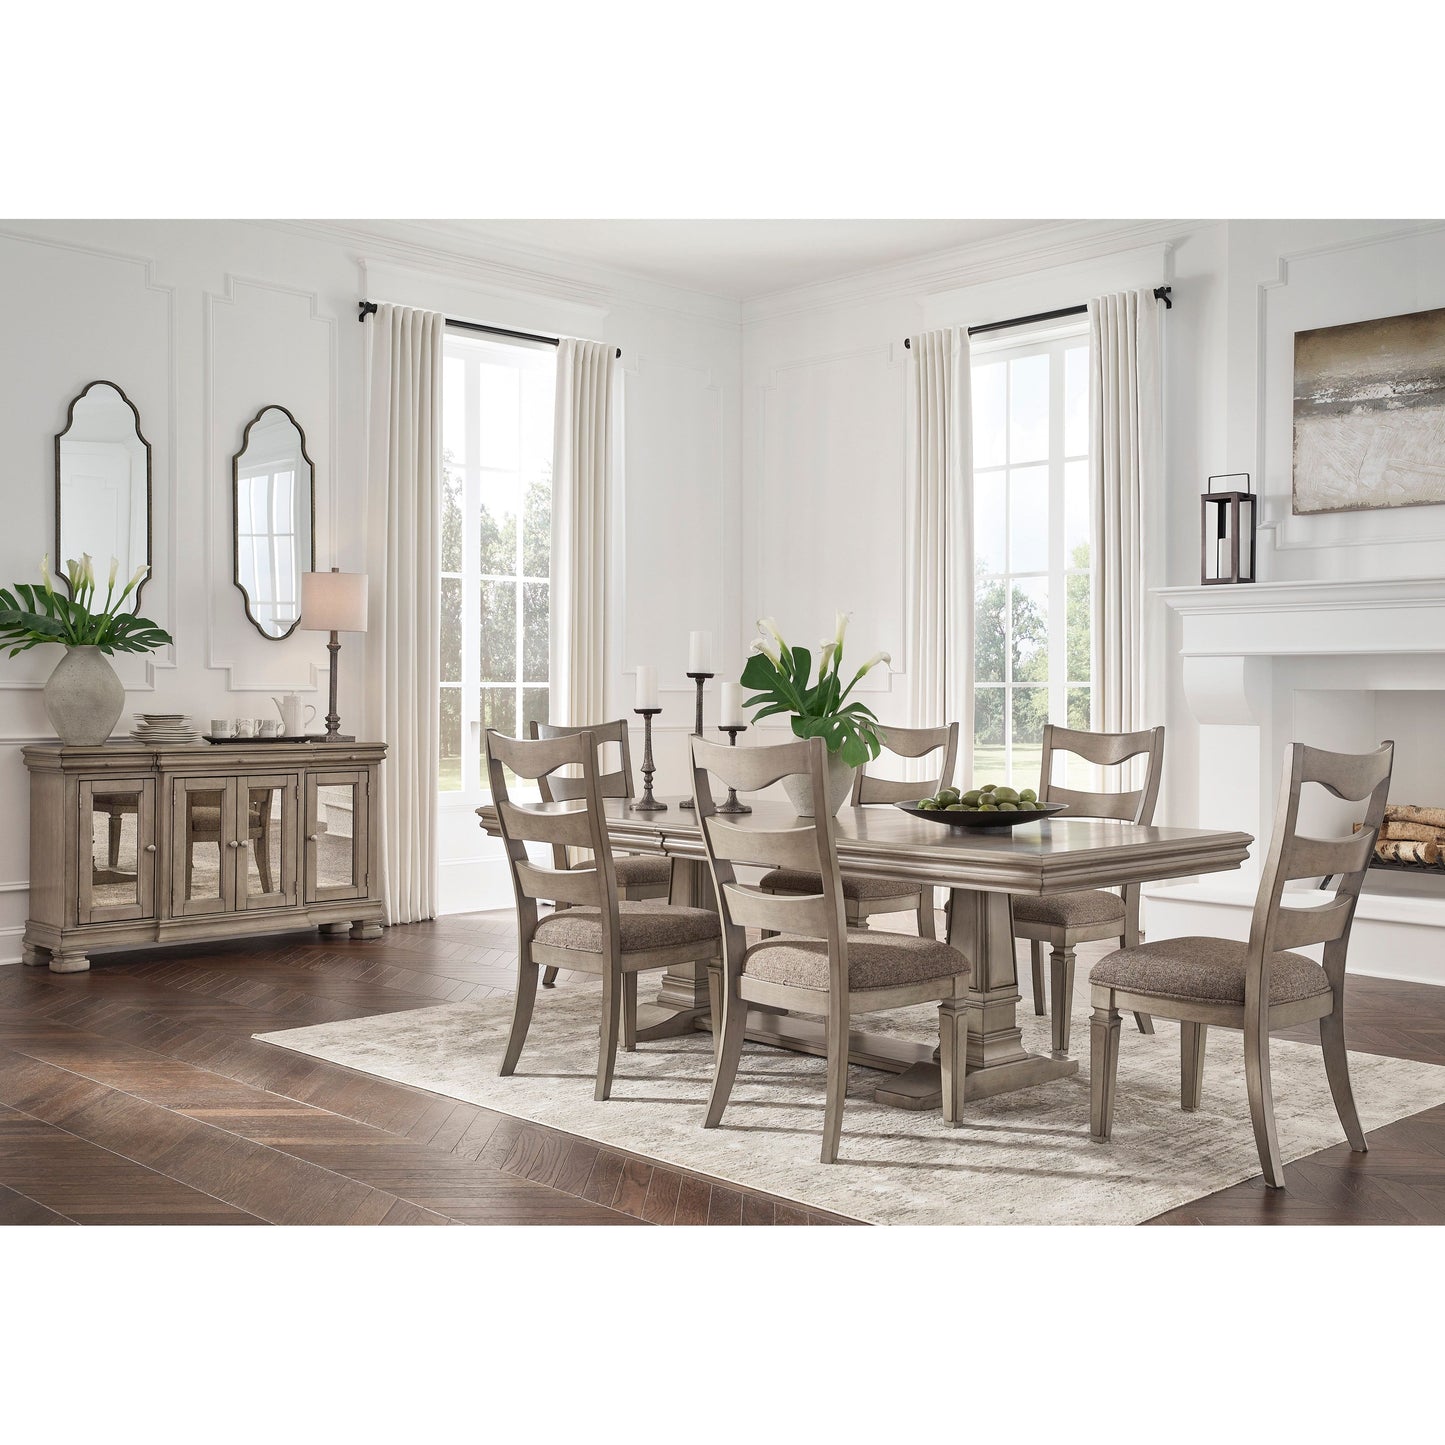 LEXORNE DINING SET - 6 CHAIRS AND TABLE